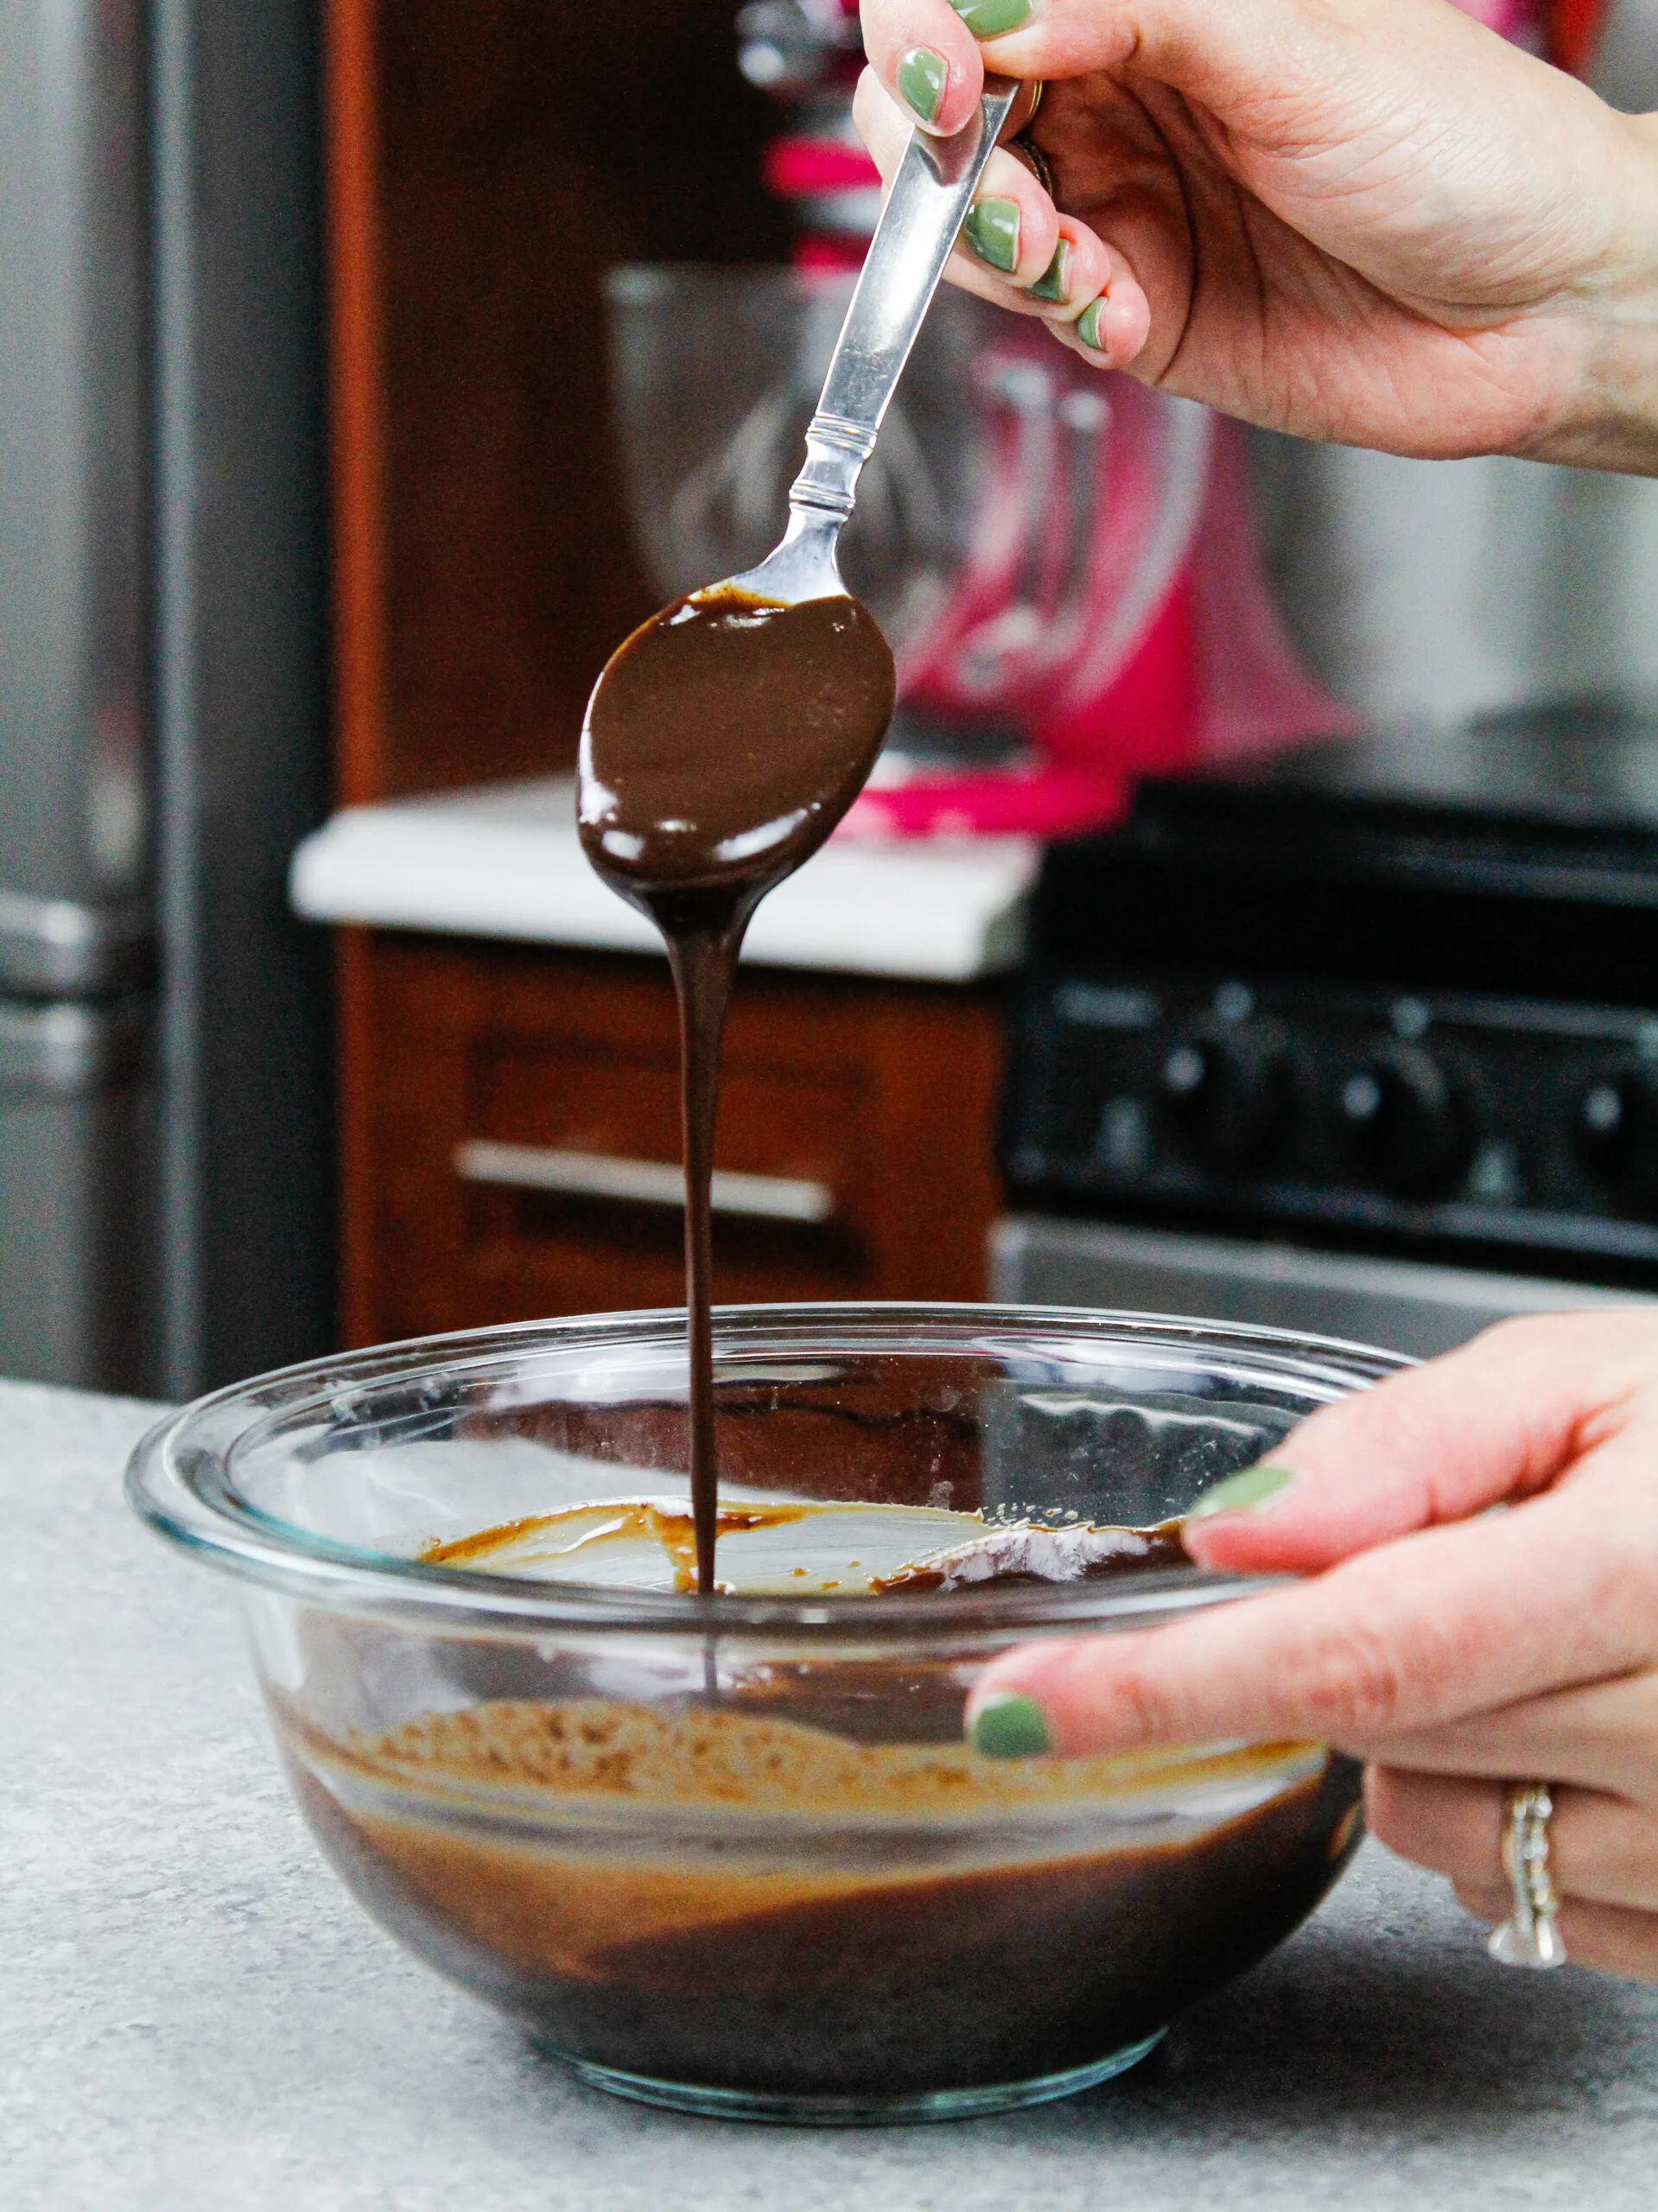 image of chocolate ganache being made in a glass bowl